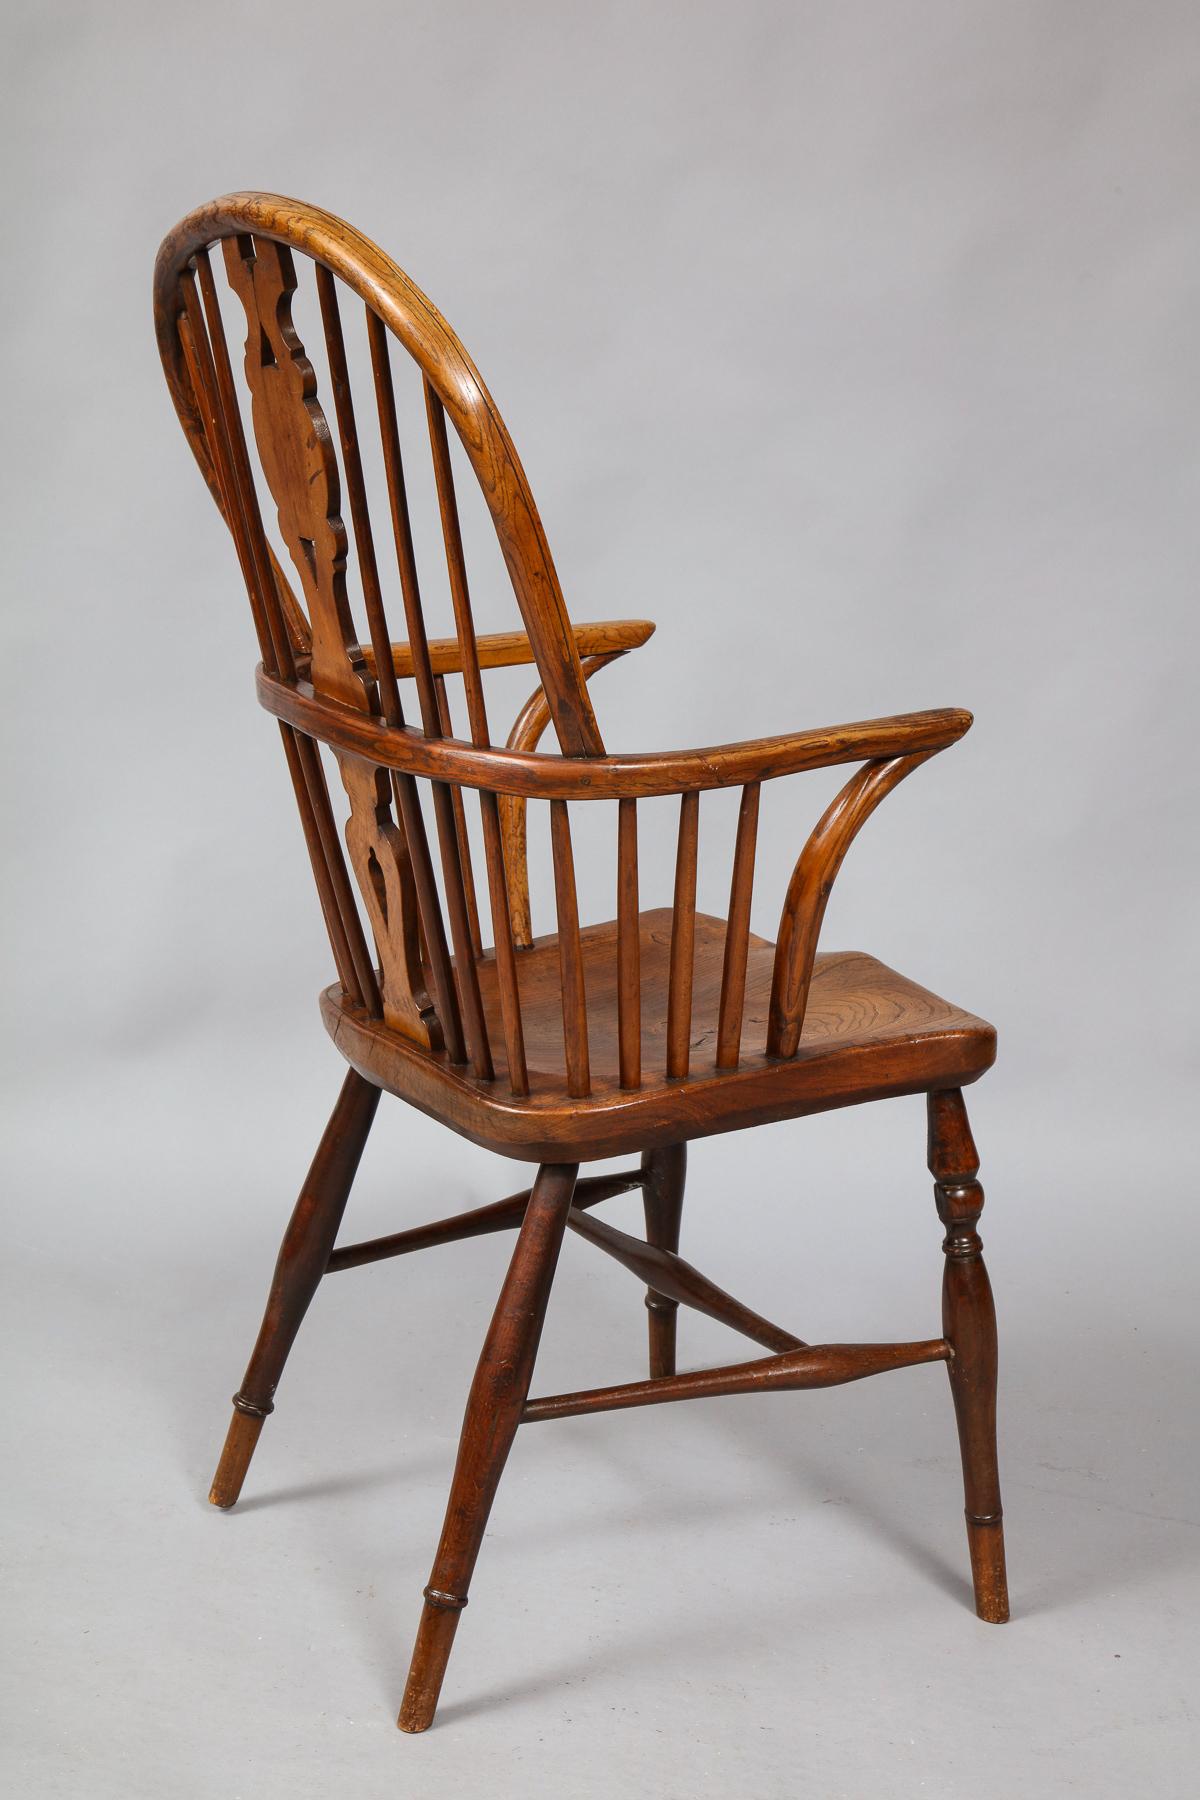 Country 19th Century English Hoop Back Windsor Armchair